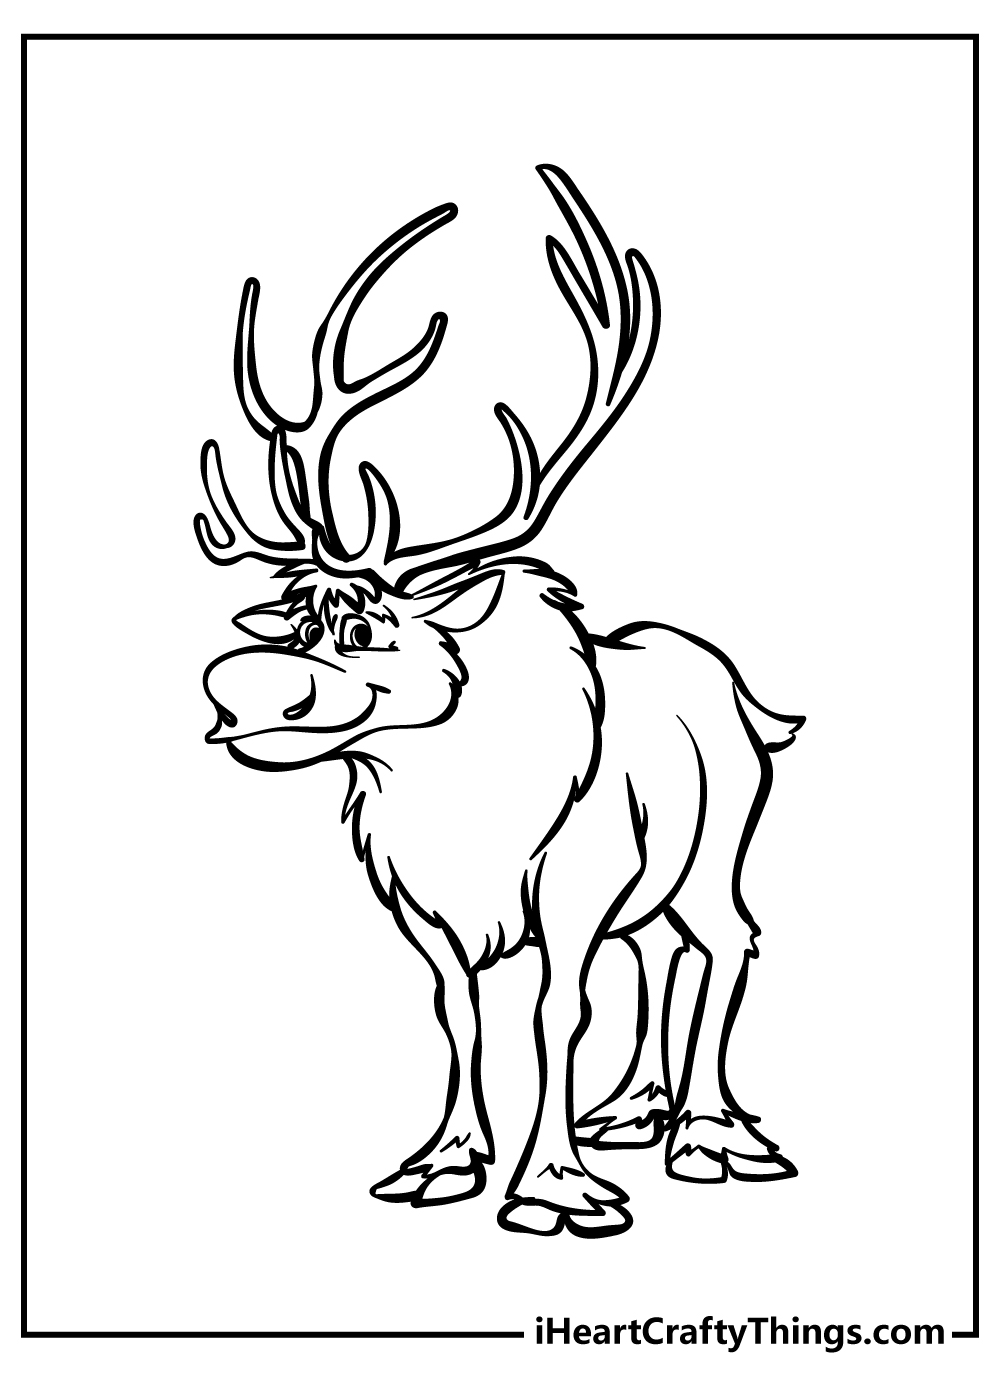 Frozen Coloring Pages for adults free printable